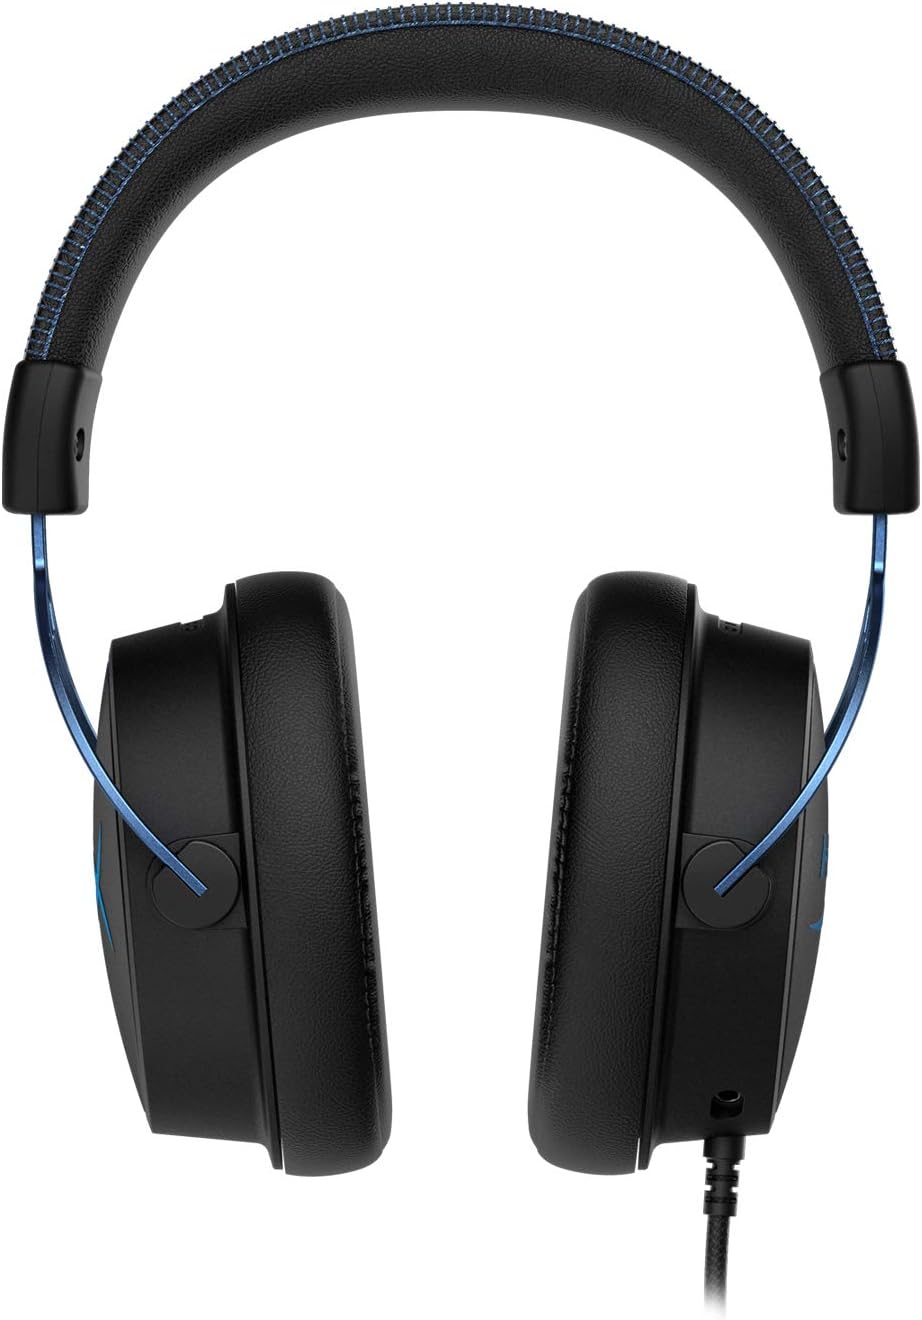 HyperX Cloud Alpha S - PC Gaming Headset, 7.1 Surround Sound - PC, PS5, Xbox Series X|S - RED | BLACK - BLUE